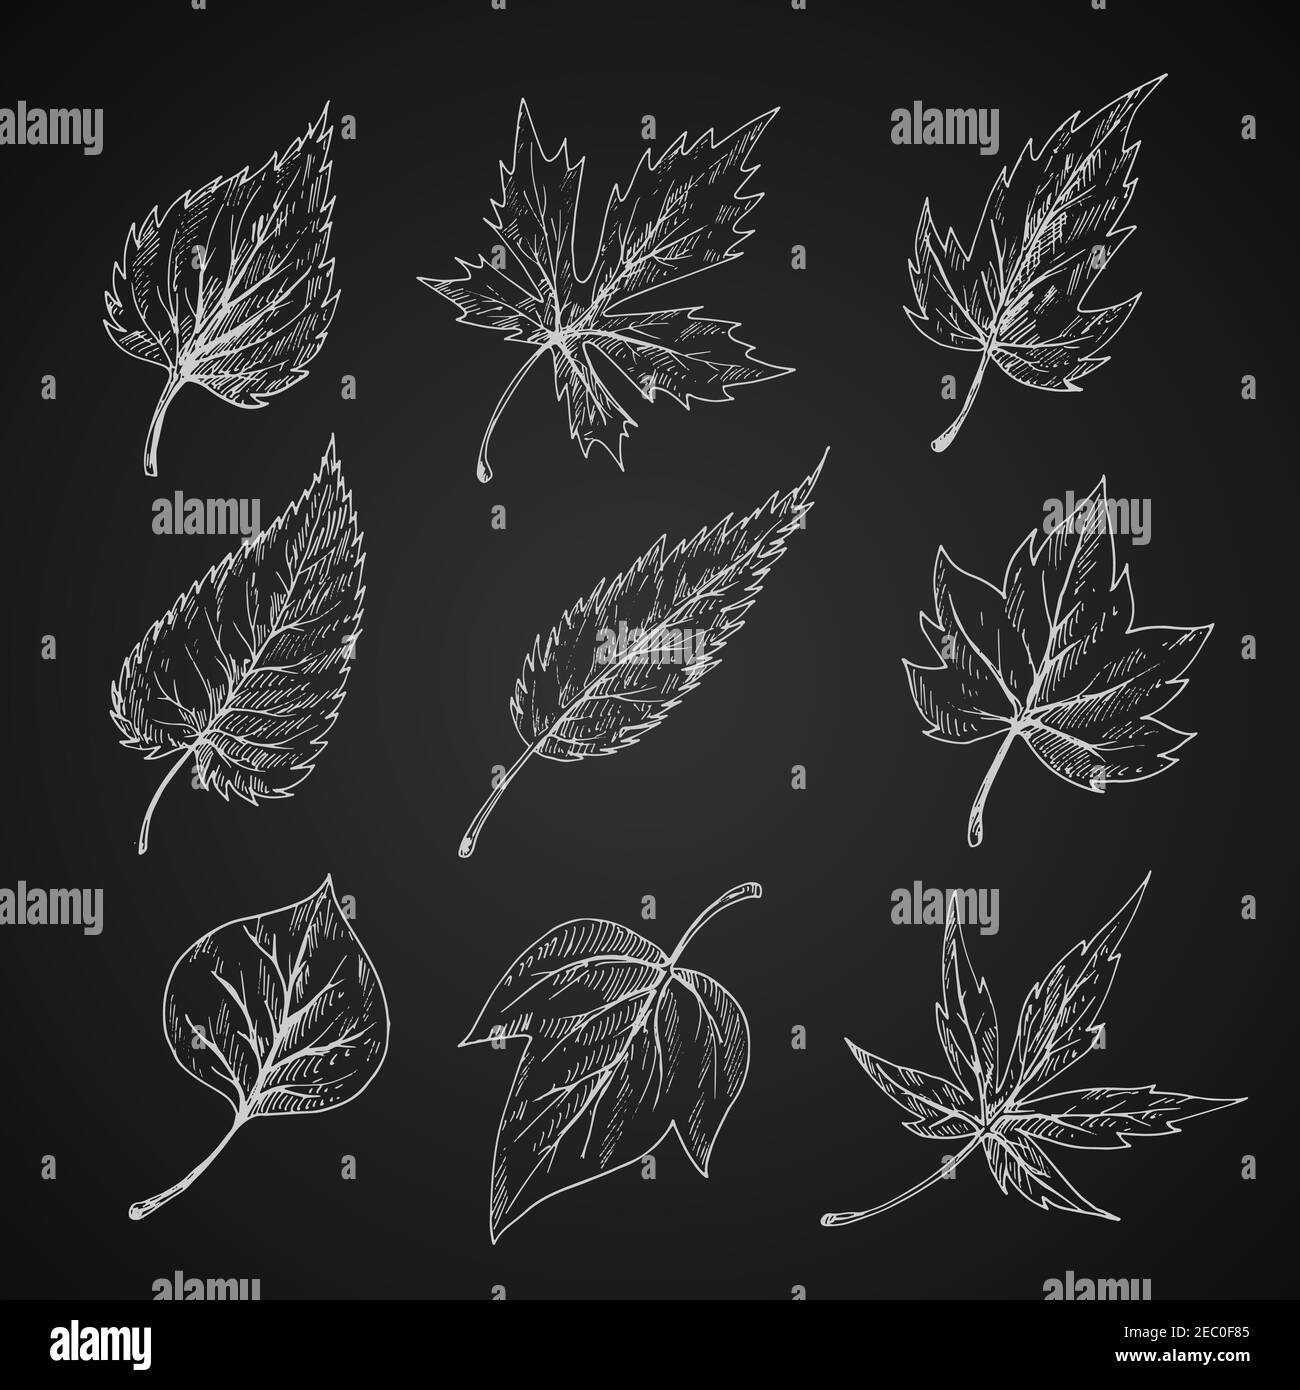 Trees and bushes leaves chalk sketches on blackboard with detailed arrangement of veins and shapes of margins. Stylized engraving foliage for nature, Stock Vector